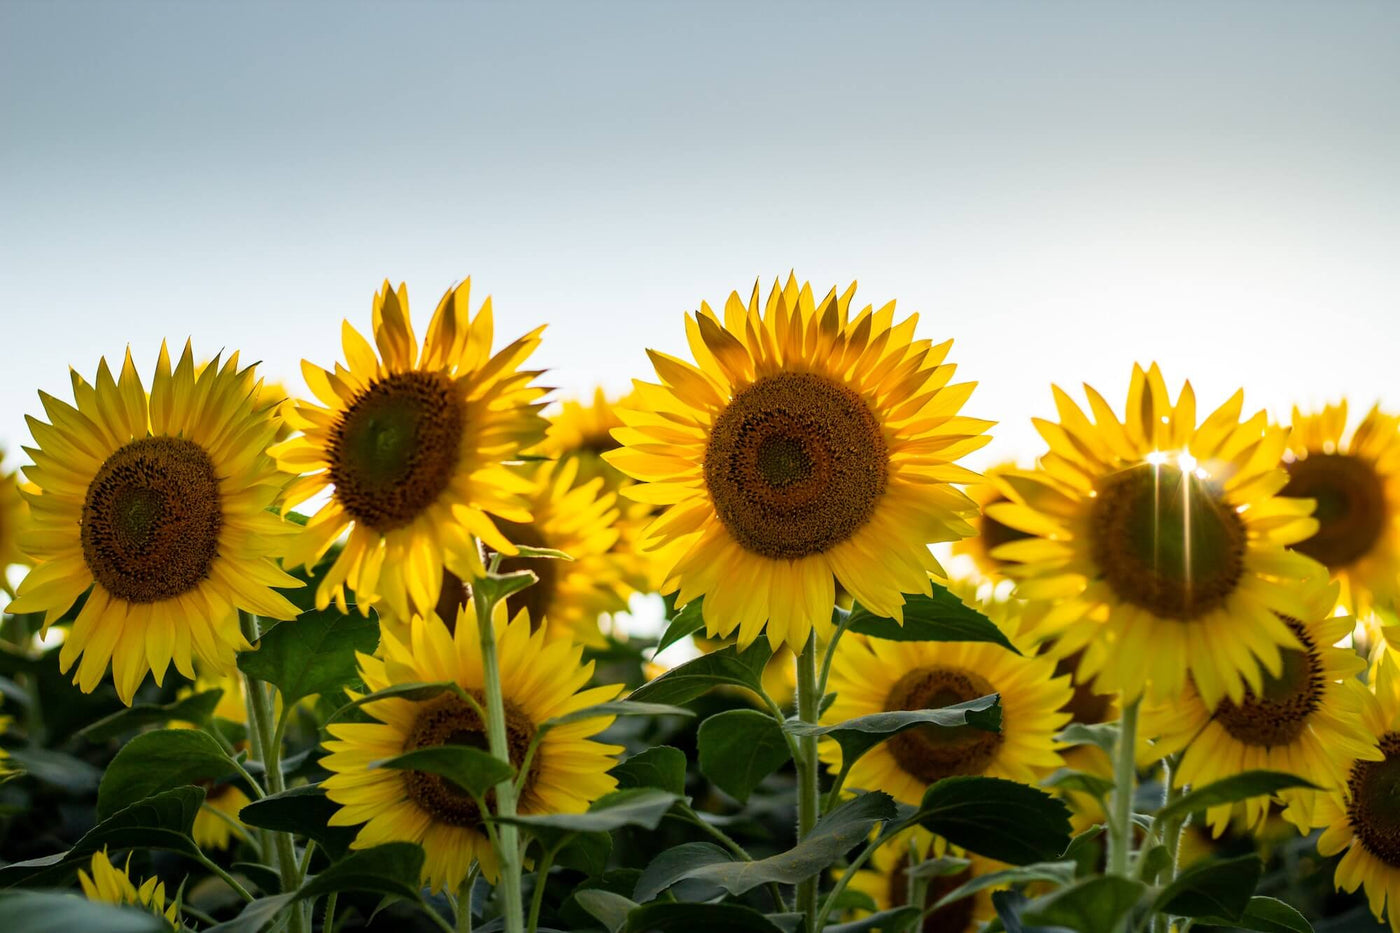 Sunflower seeds grown into sunflowers in a field